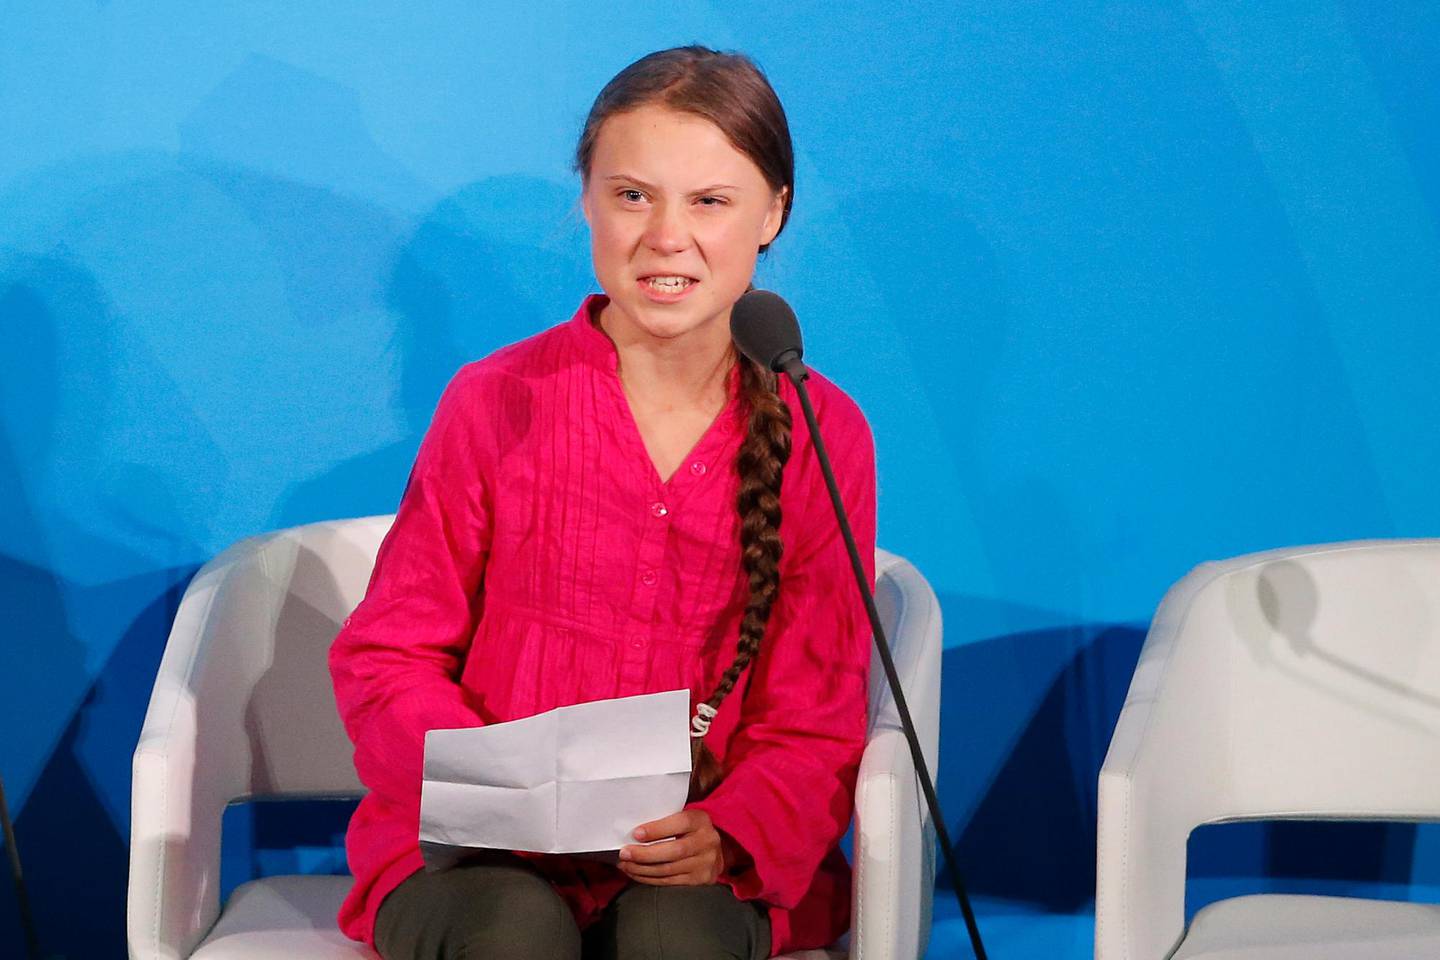 Environmental activist Greta Thunberg, of Sweden, addresses the Climate Action Summit in the United Nations General Assembly, at U.N. headquarters, Monday, Sept. 23, 2019. (AP Photo/Jason DeCrow)